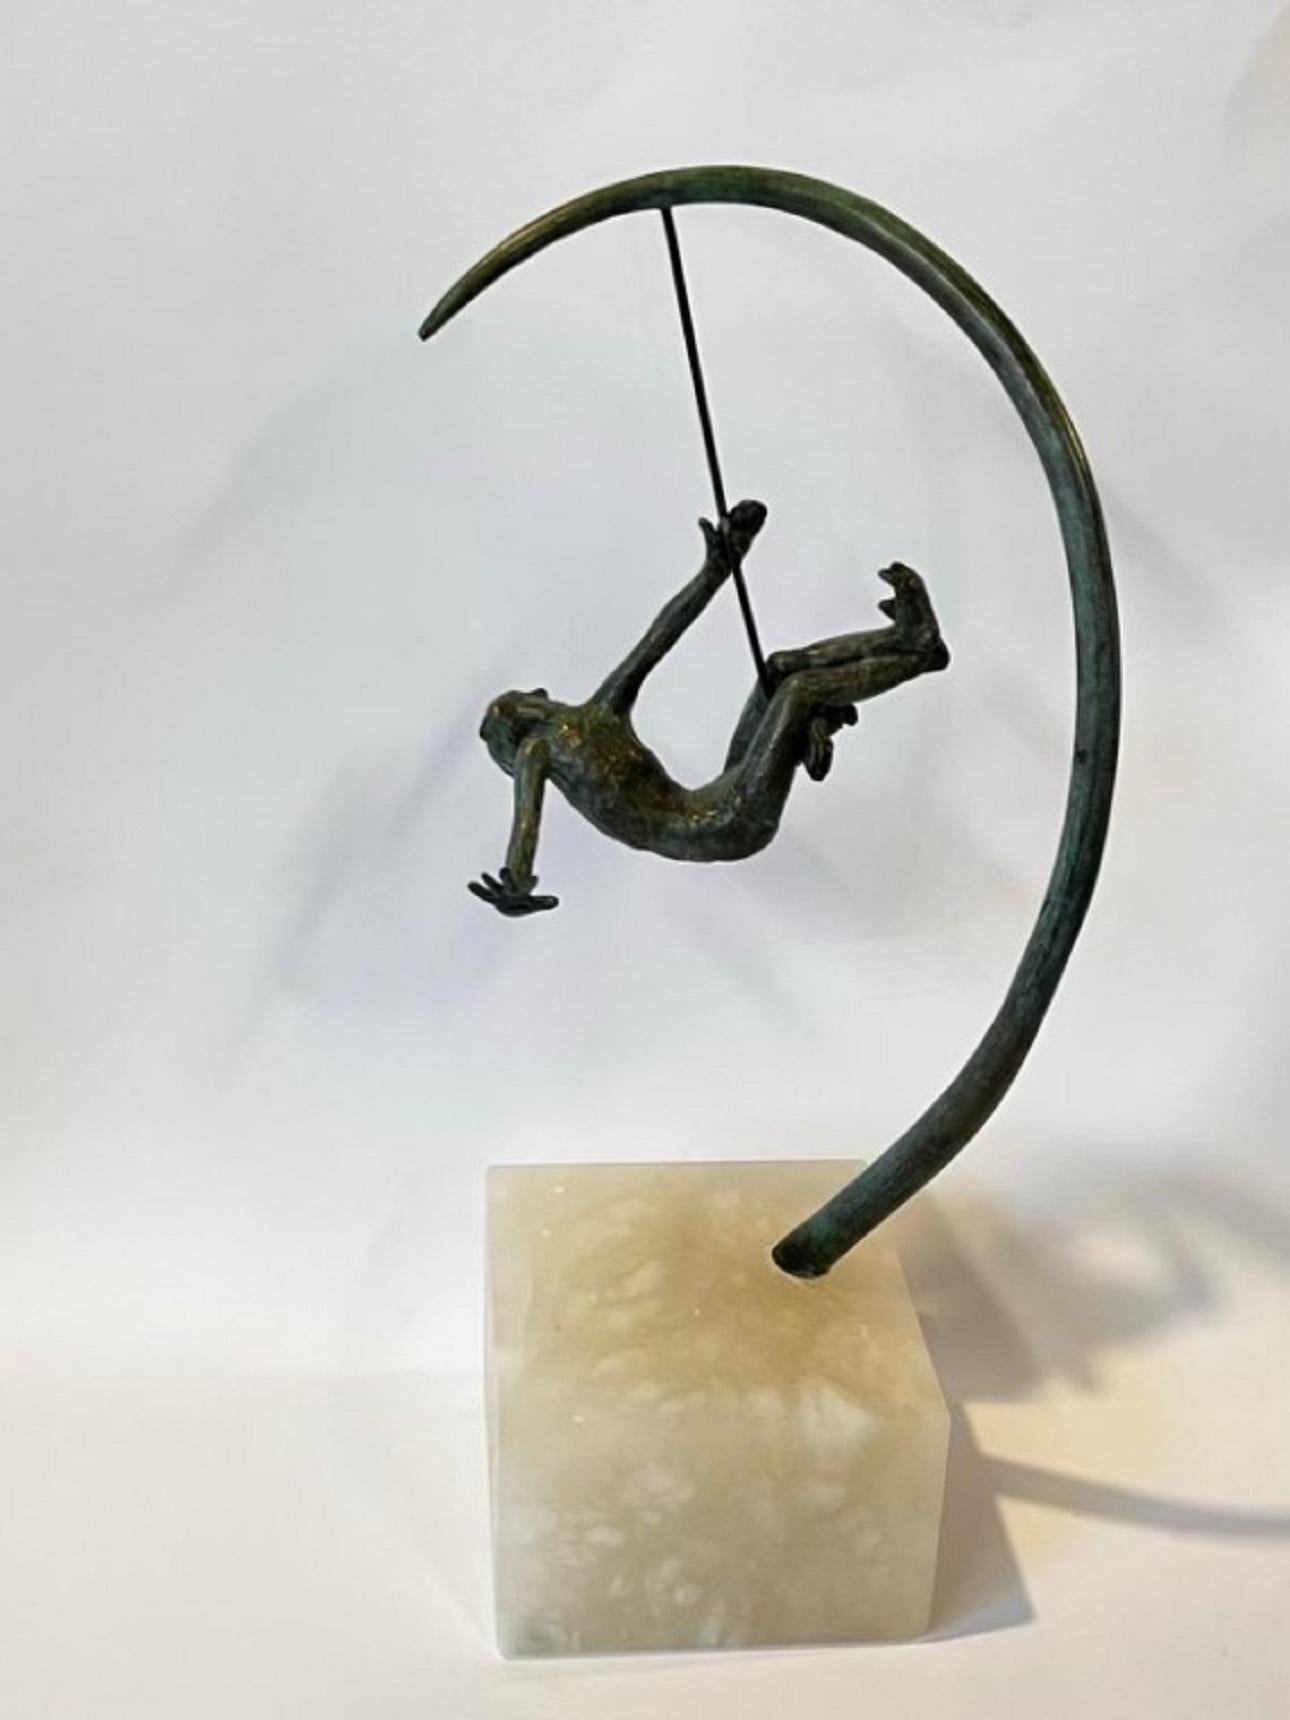 Alison Bell Figurative Sculpture - Whirling, bronze sclupture on ancaster, still-life